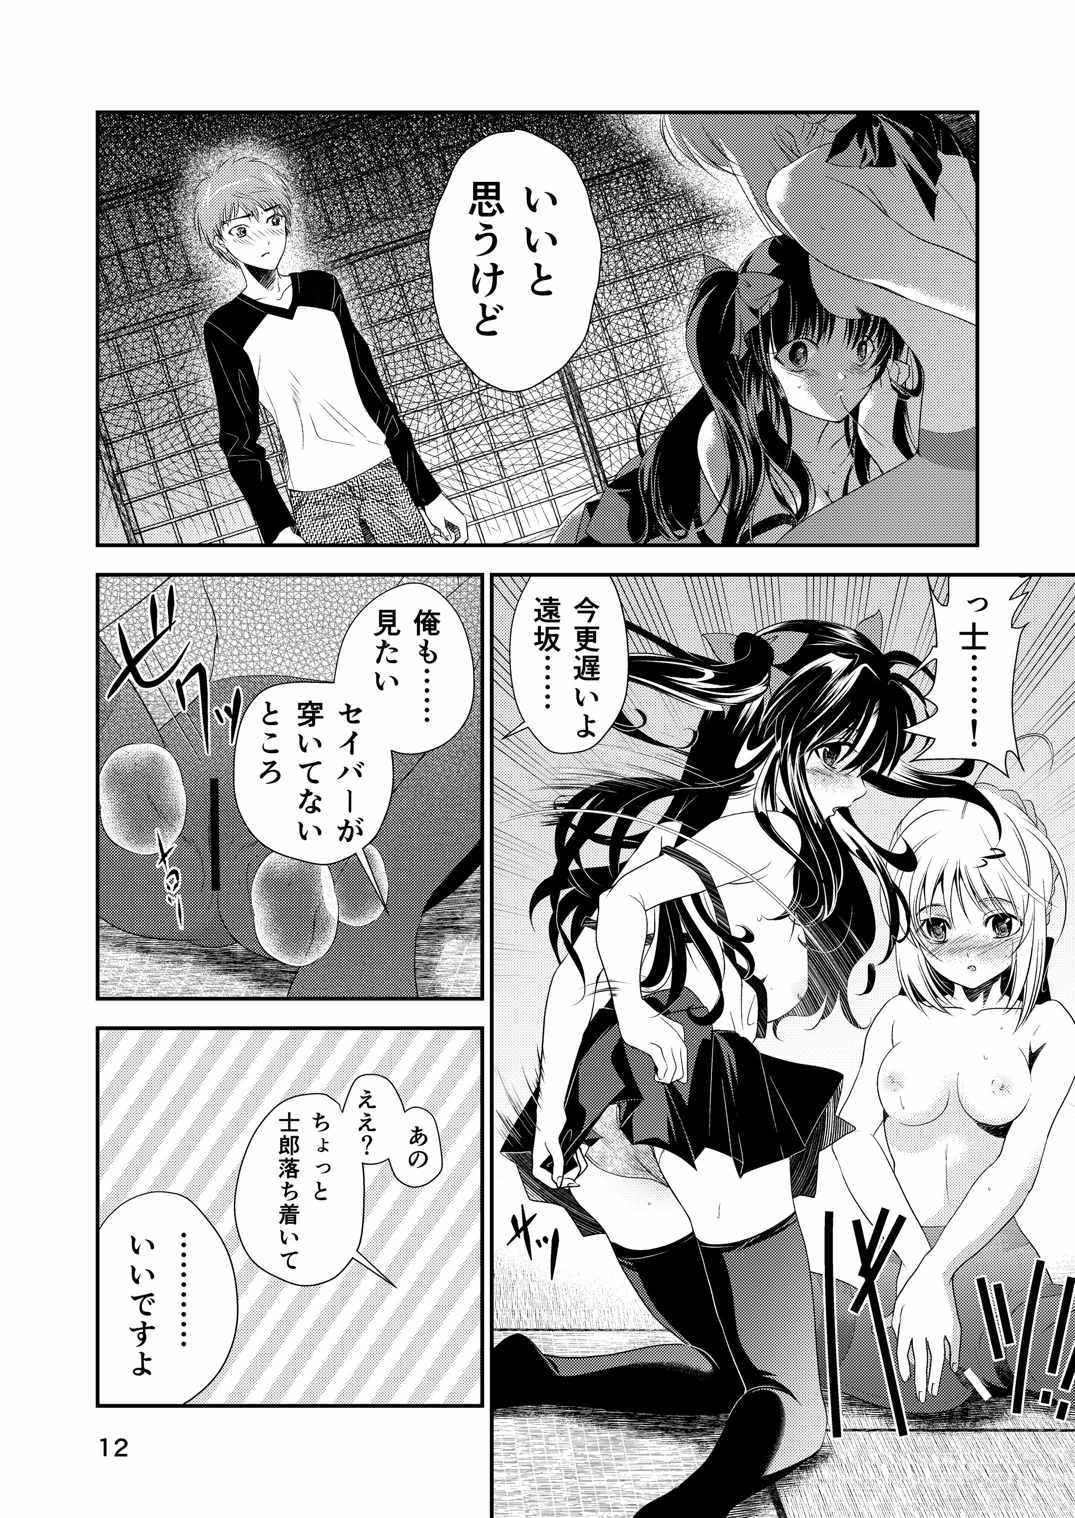 [Meiji] P.P.P (Fate/Stay Night) page 11 full